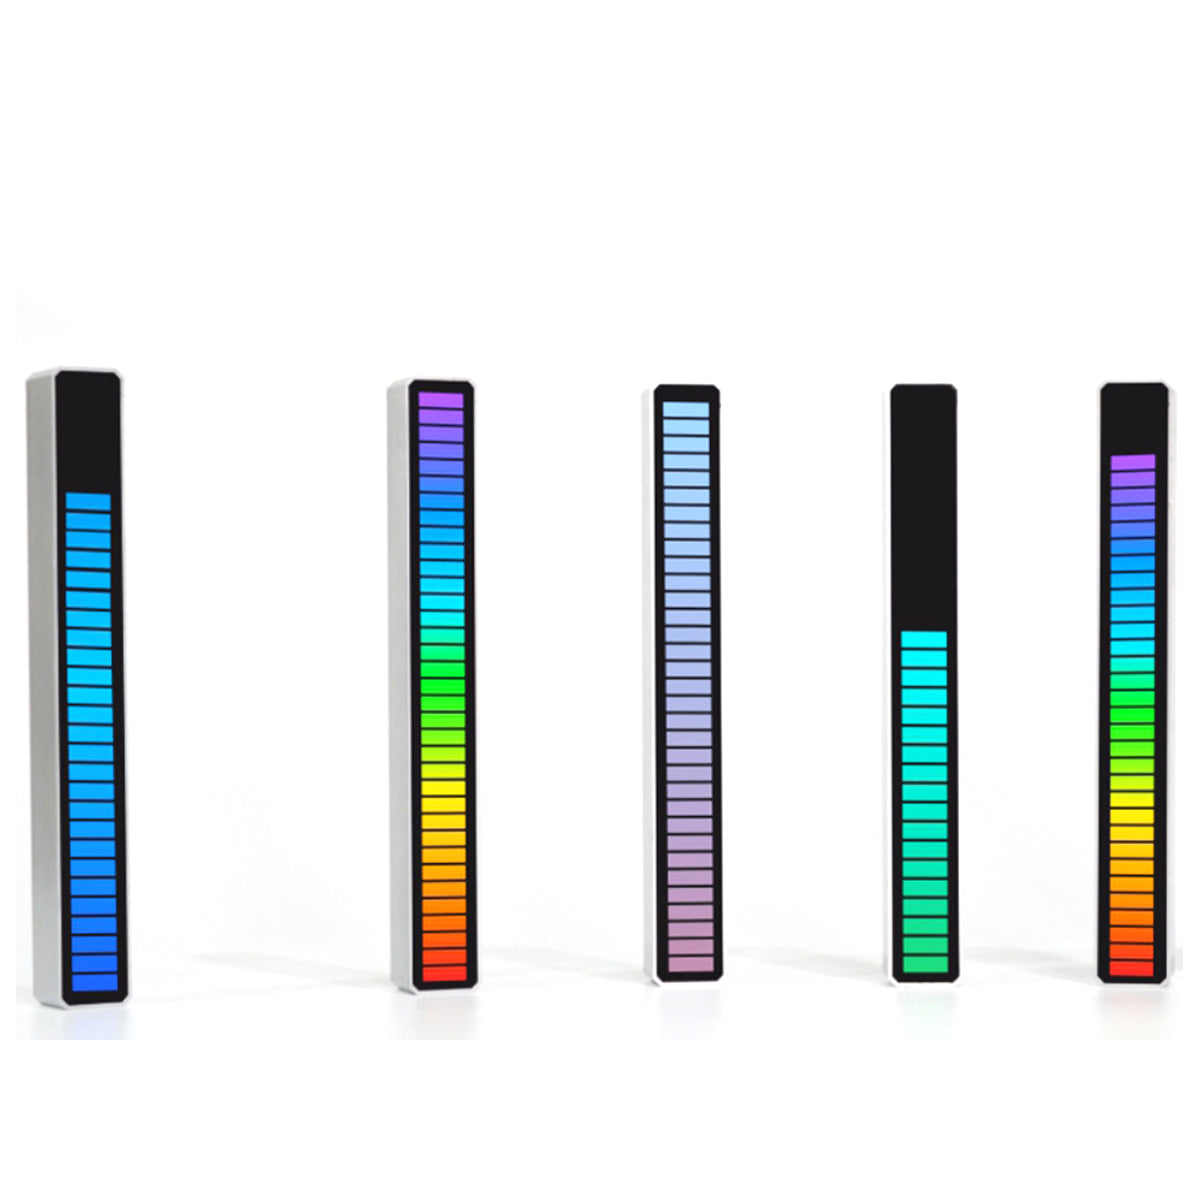  Dance To The Tunes Sound Activated Multi Color Light Bar by VistaShops VistaShops Perfumarie